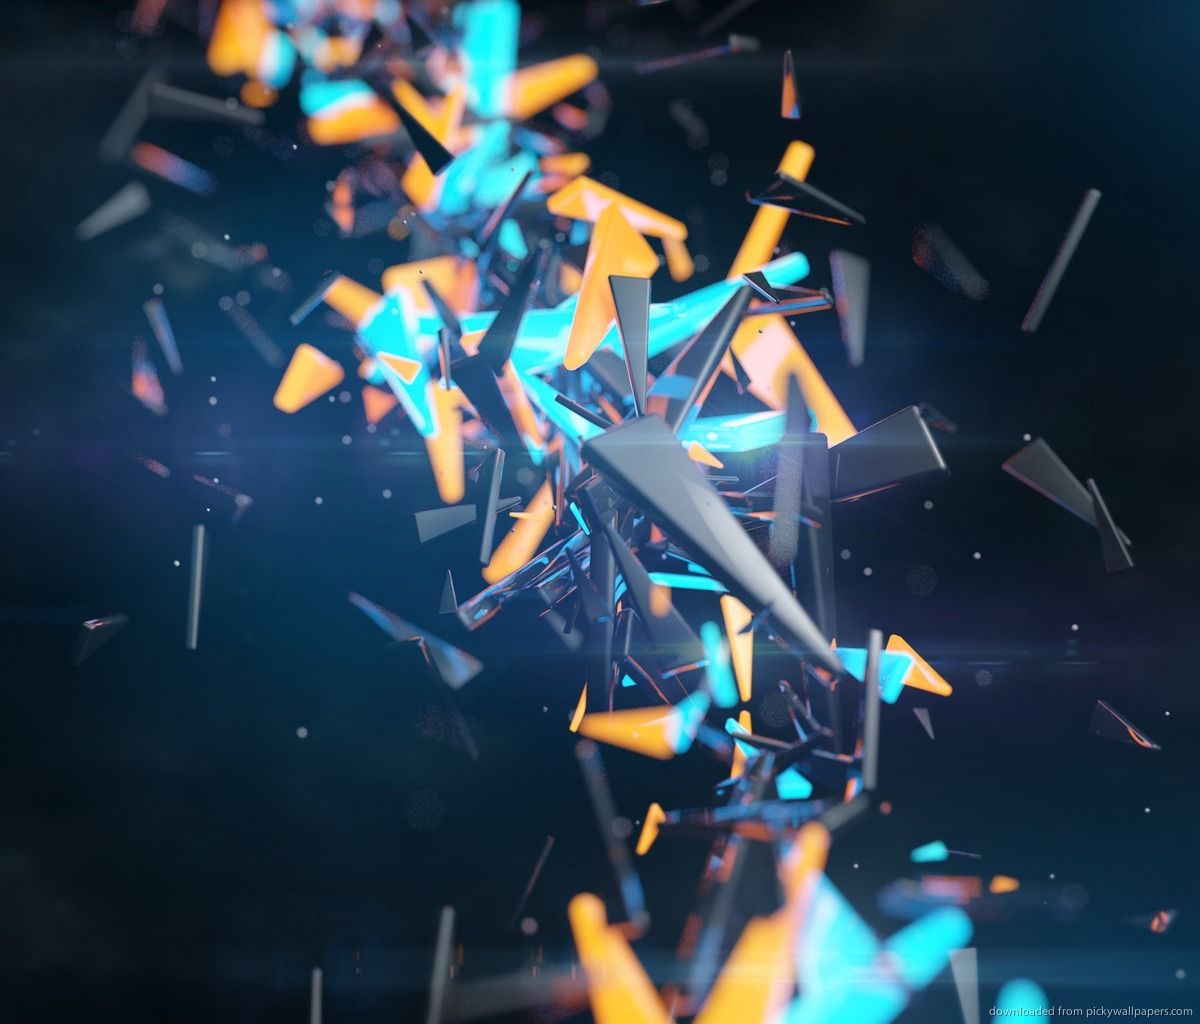 Download 3D Particles Wallpaper For Samsung Galaxy Tab